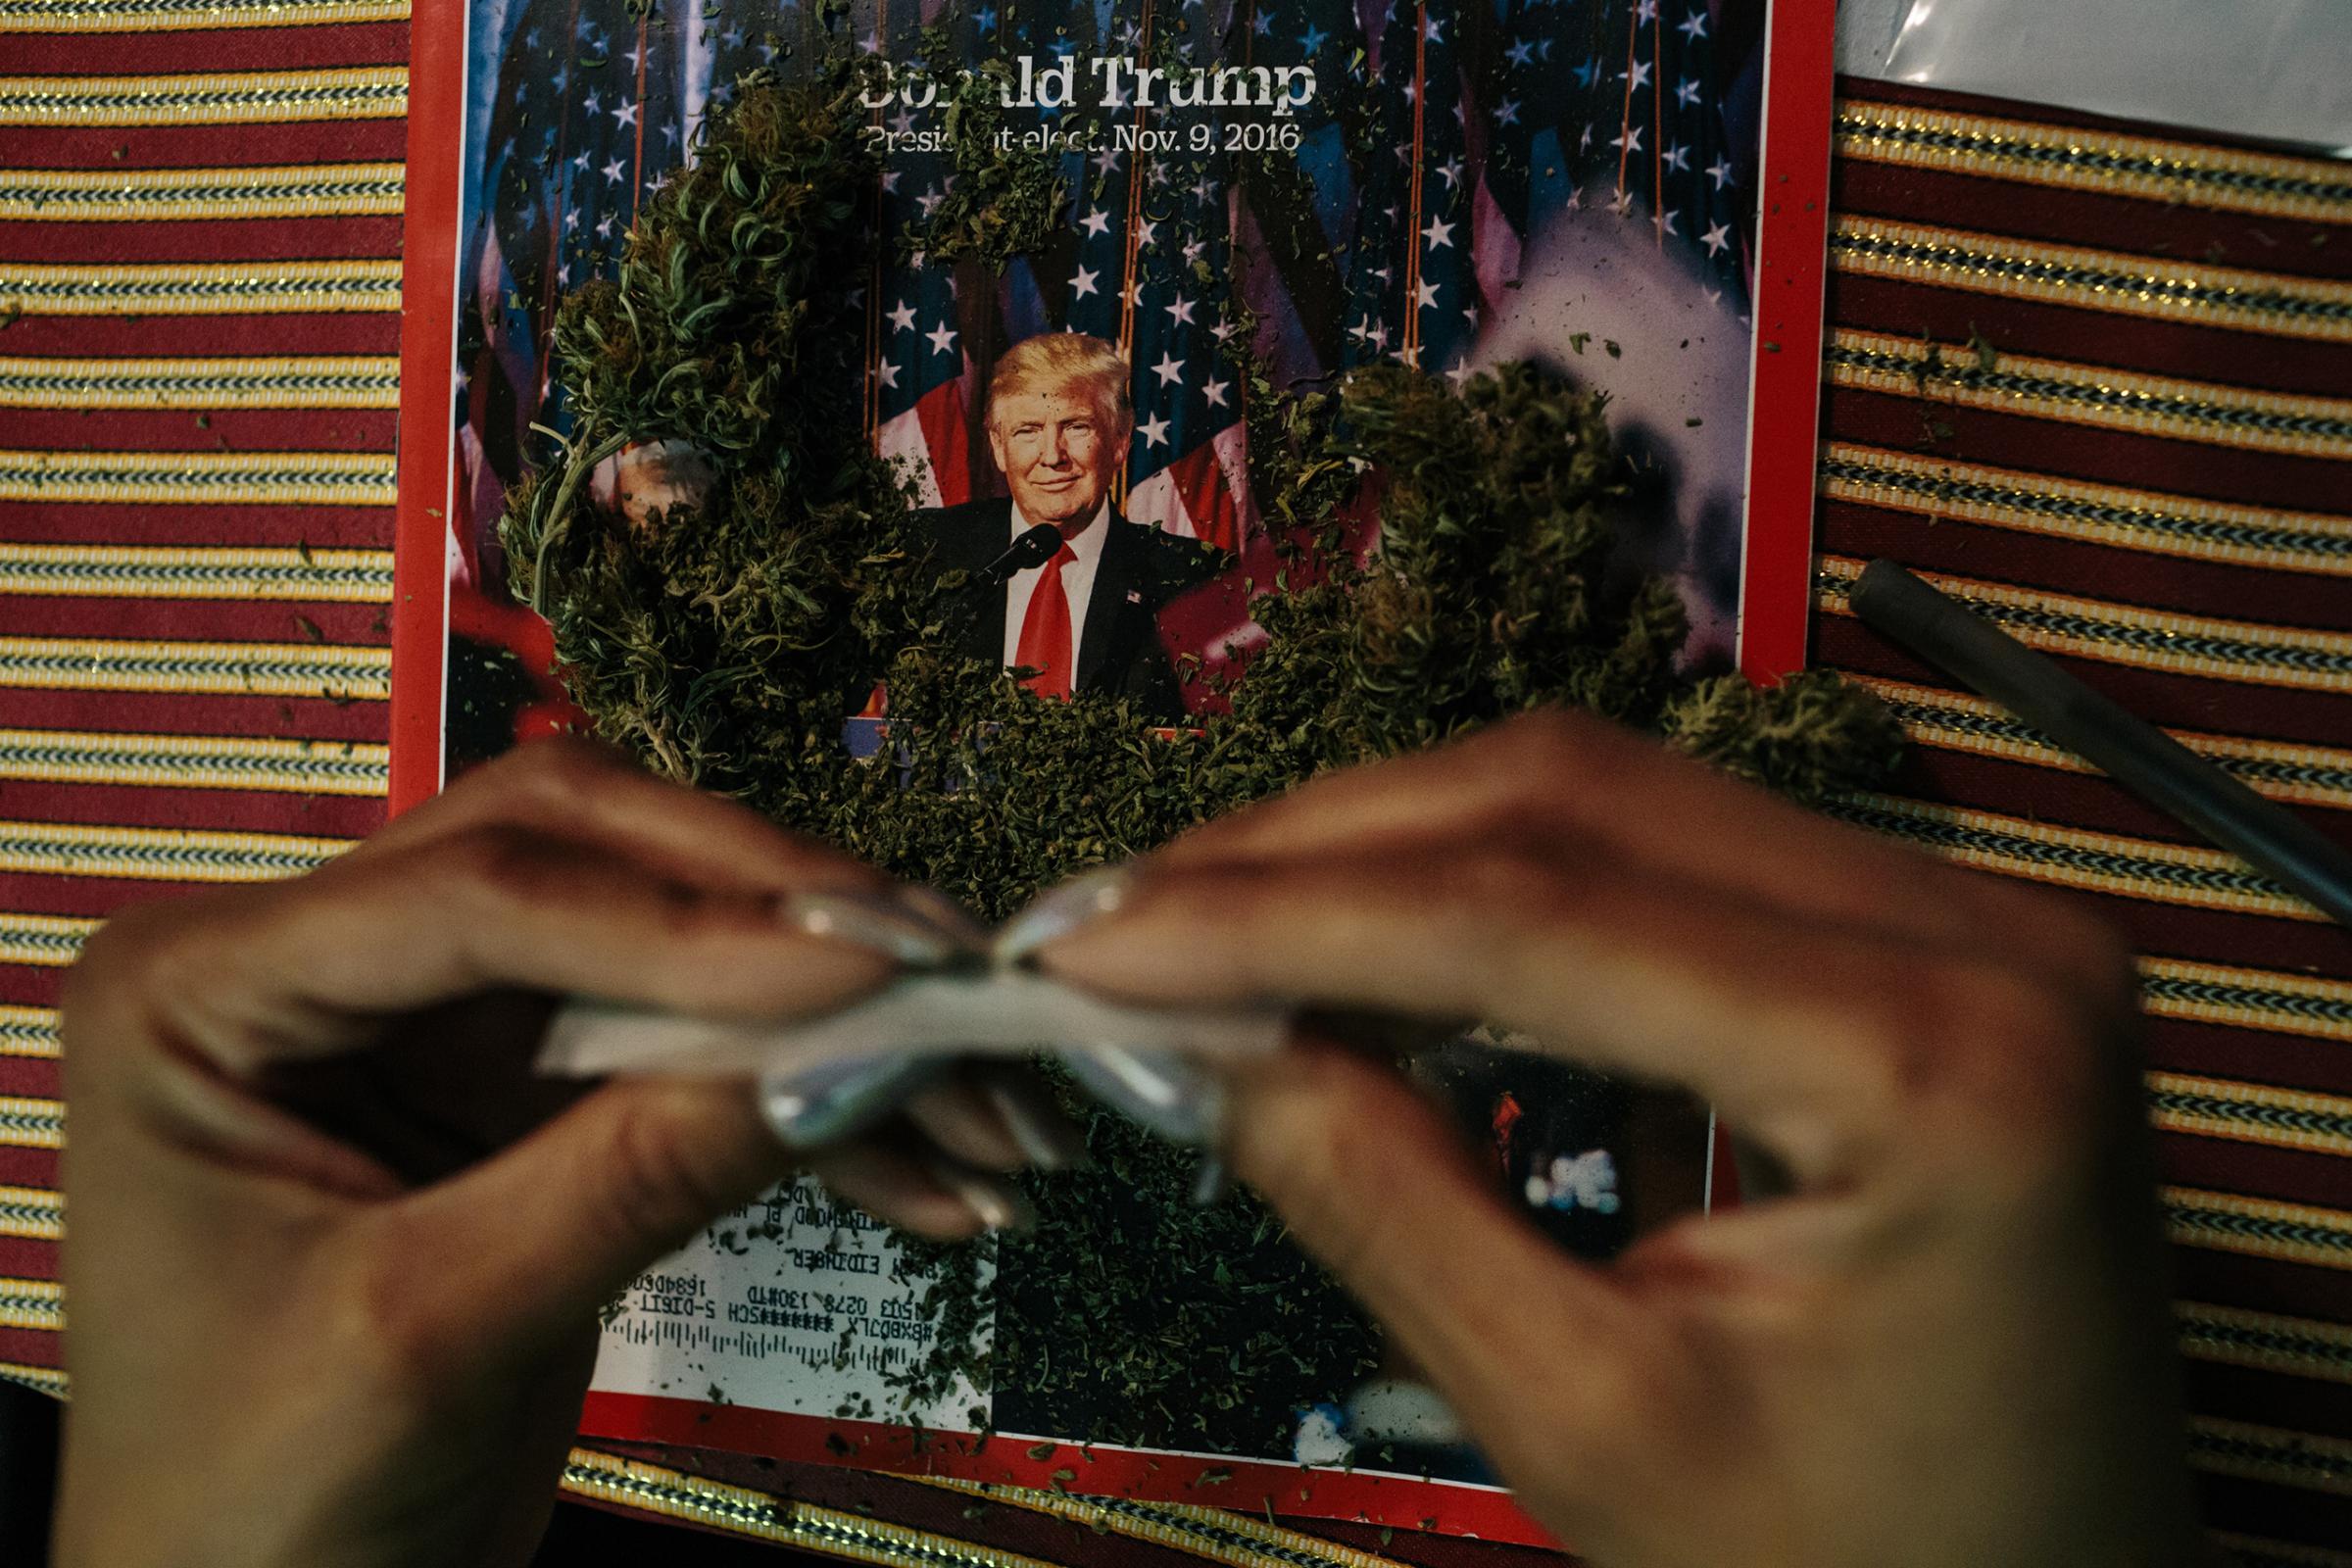 An activist from the cannabis community DCMJ rolls a joint in a Washington, D.C., home on Jan. 16 in preparation for President-Elect Donald Trump’s inauguration. A cofounder of the group said TIME magazines were used after learning a photographer on assignment for TIME would observe their operations. Other newspapers and magazines, like High Times, have previously been used when the group has been photographed by other media.